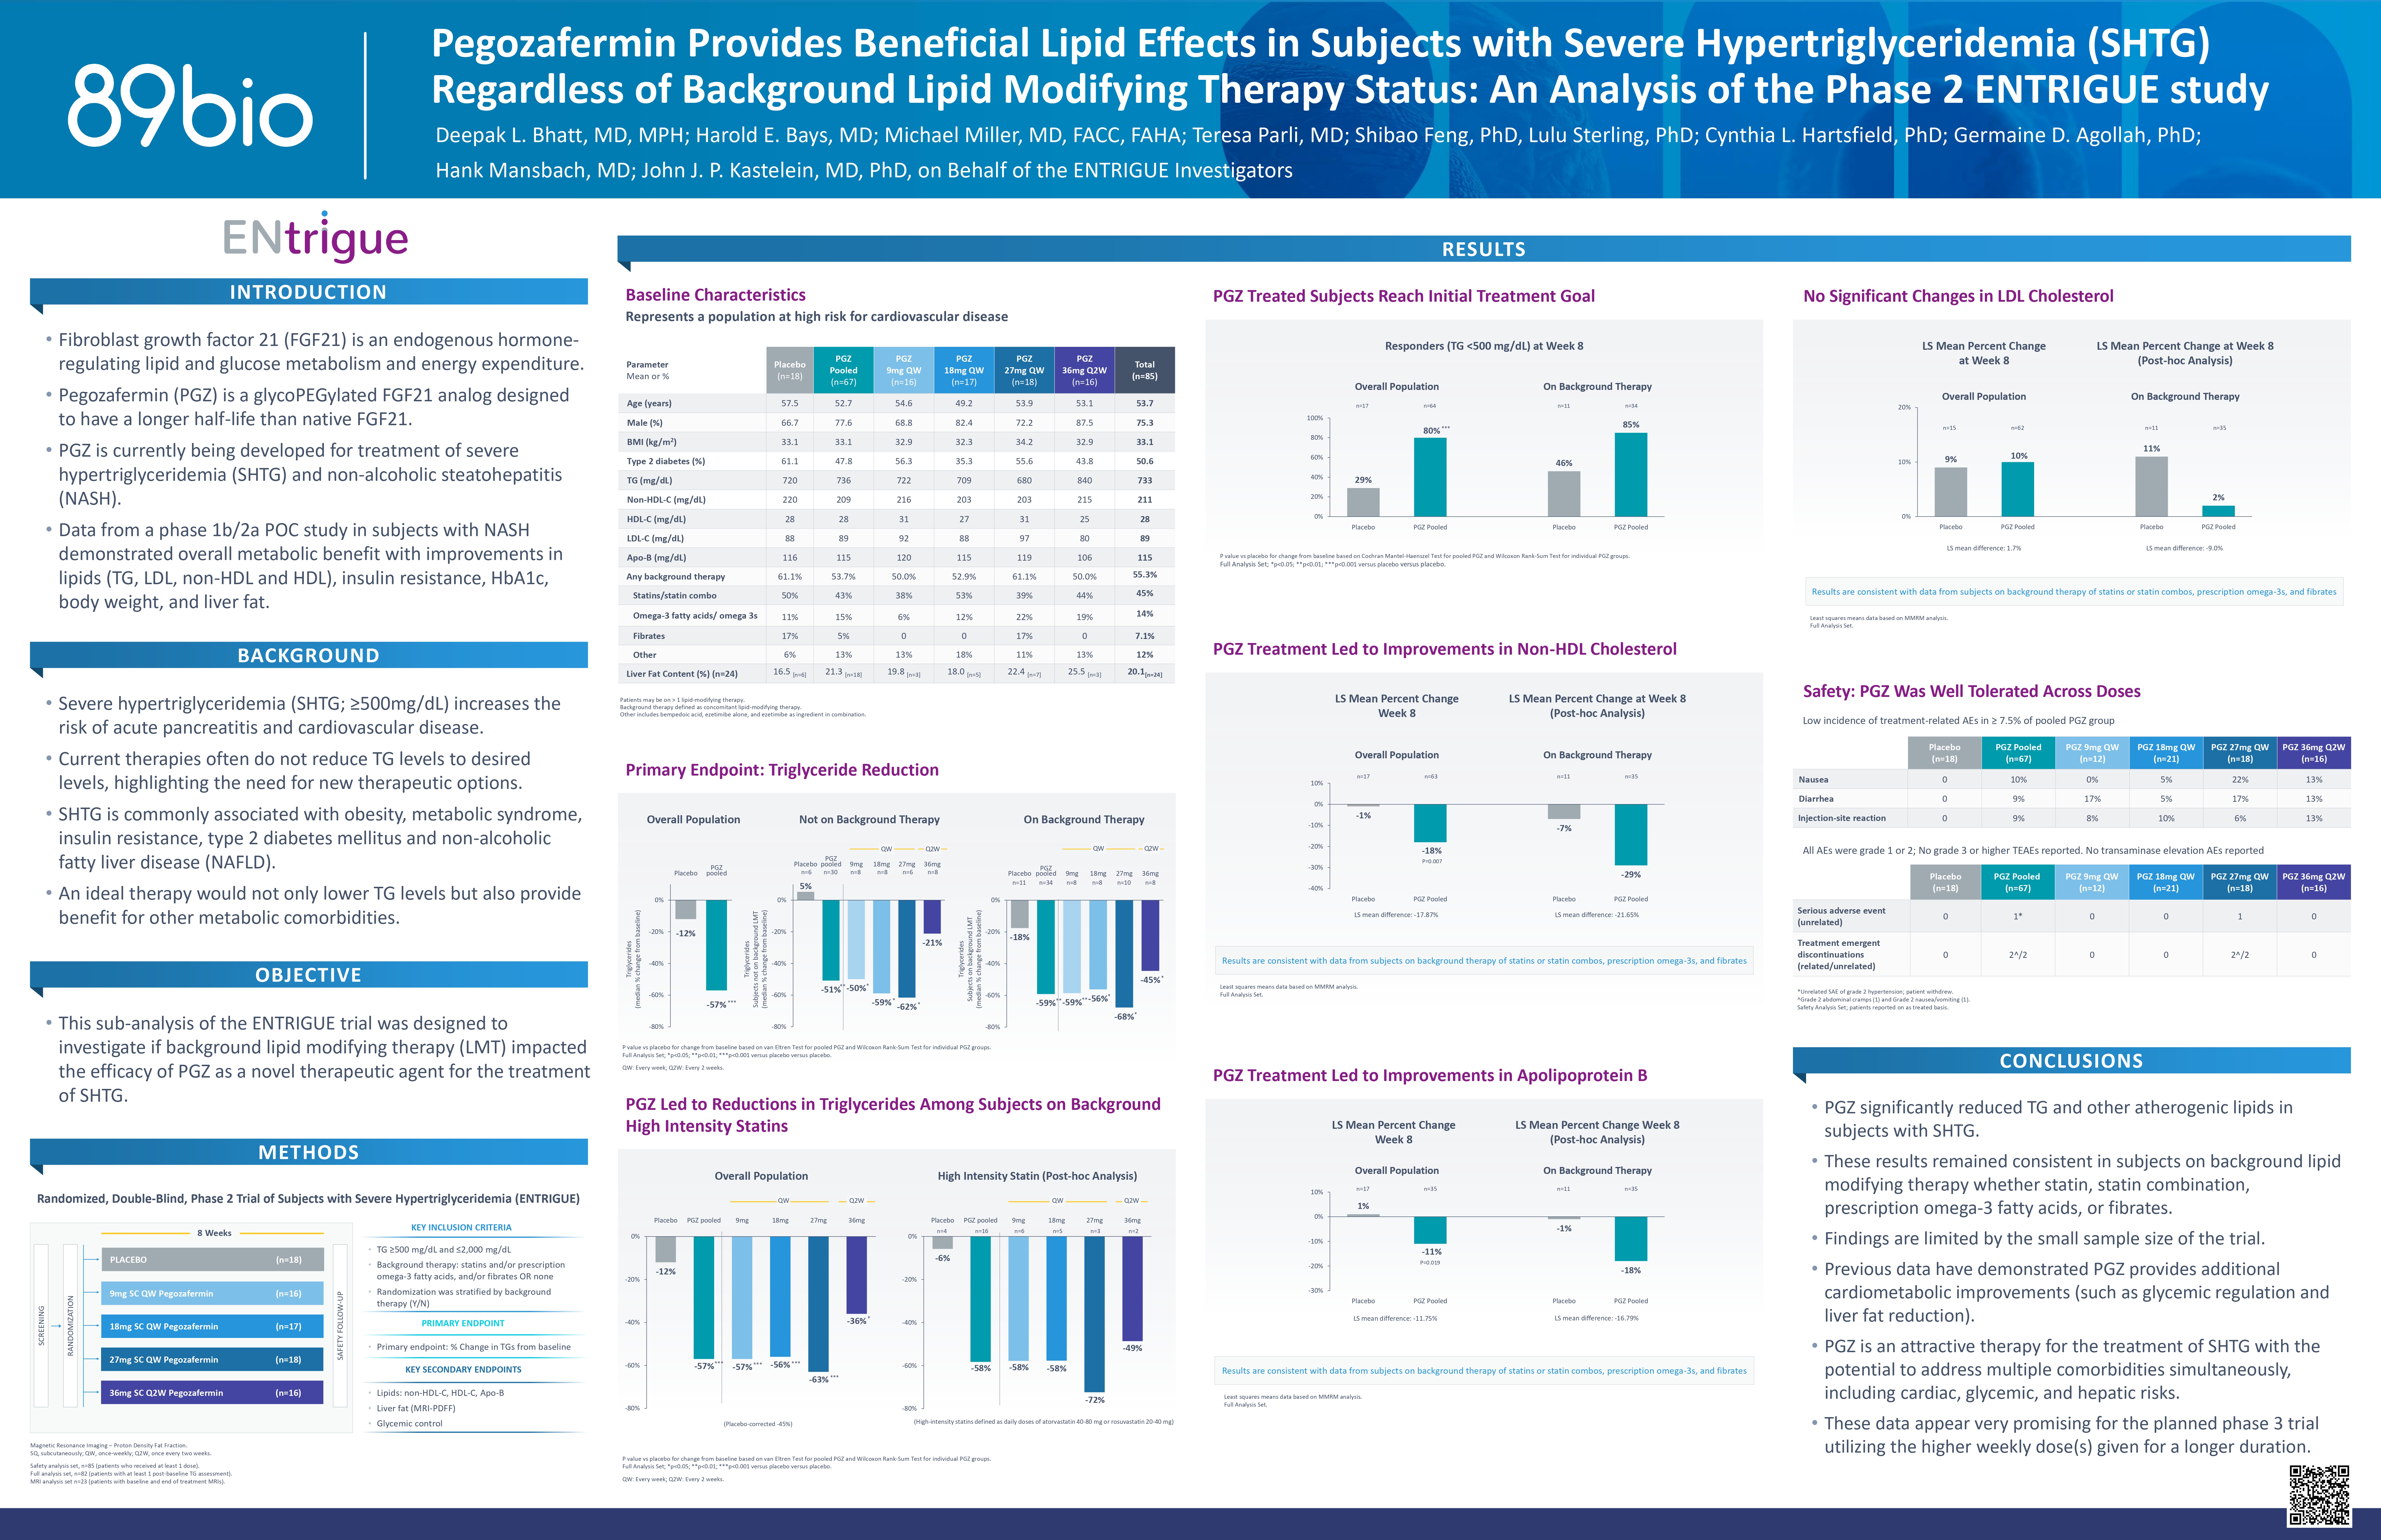 ACC 2023 poster: Pegozafermin has beneficial lipid effects in SHTG: Phase 2 ENTRIGUE study.